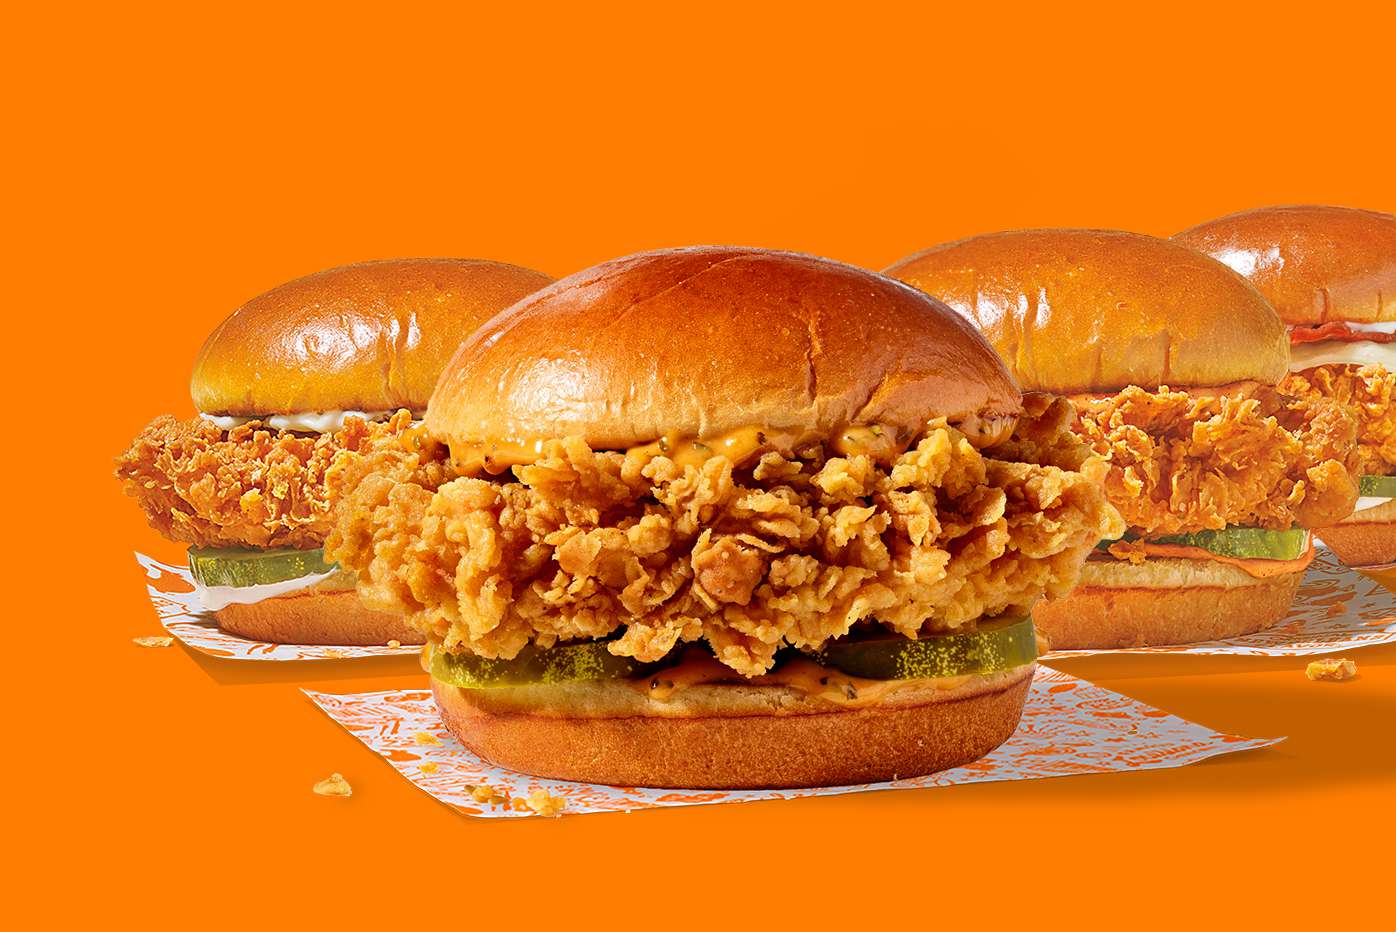 popeyes has an all-new fried chicken sandwich, and fans are psyched